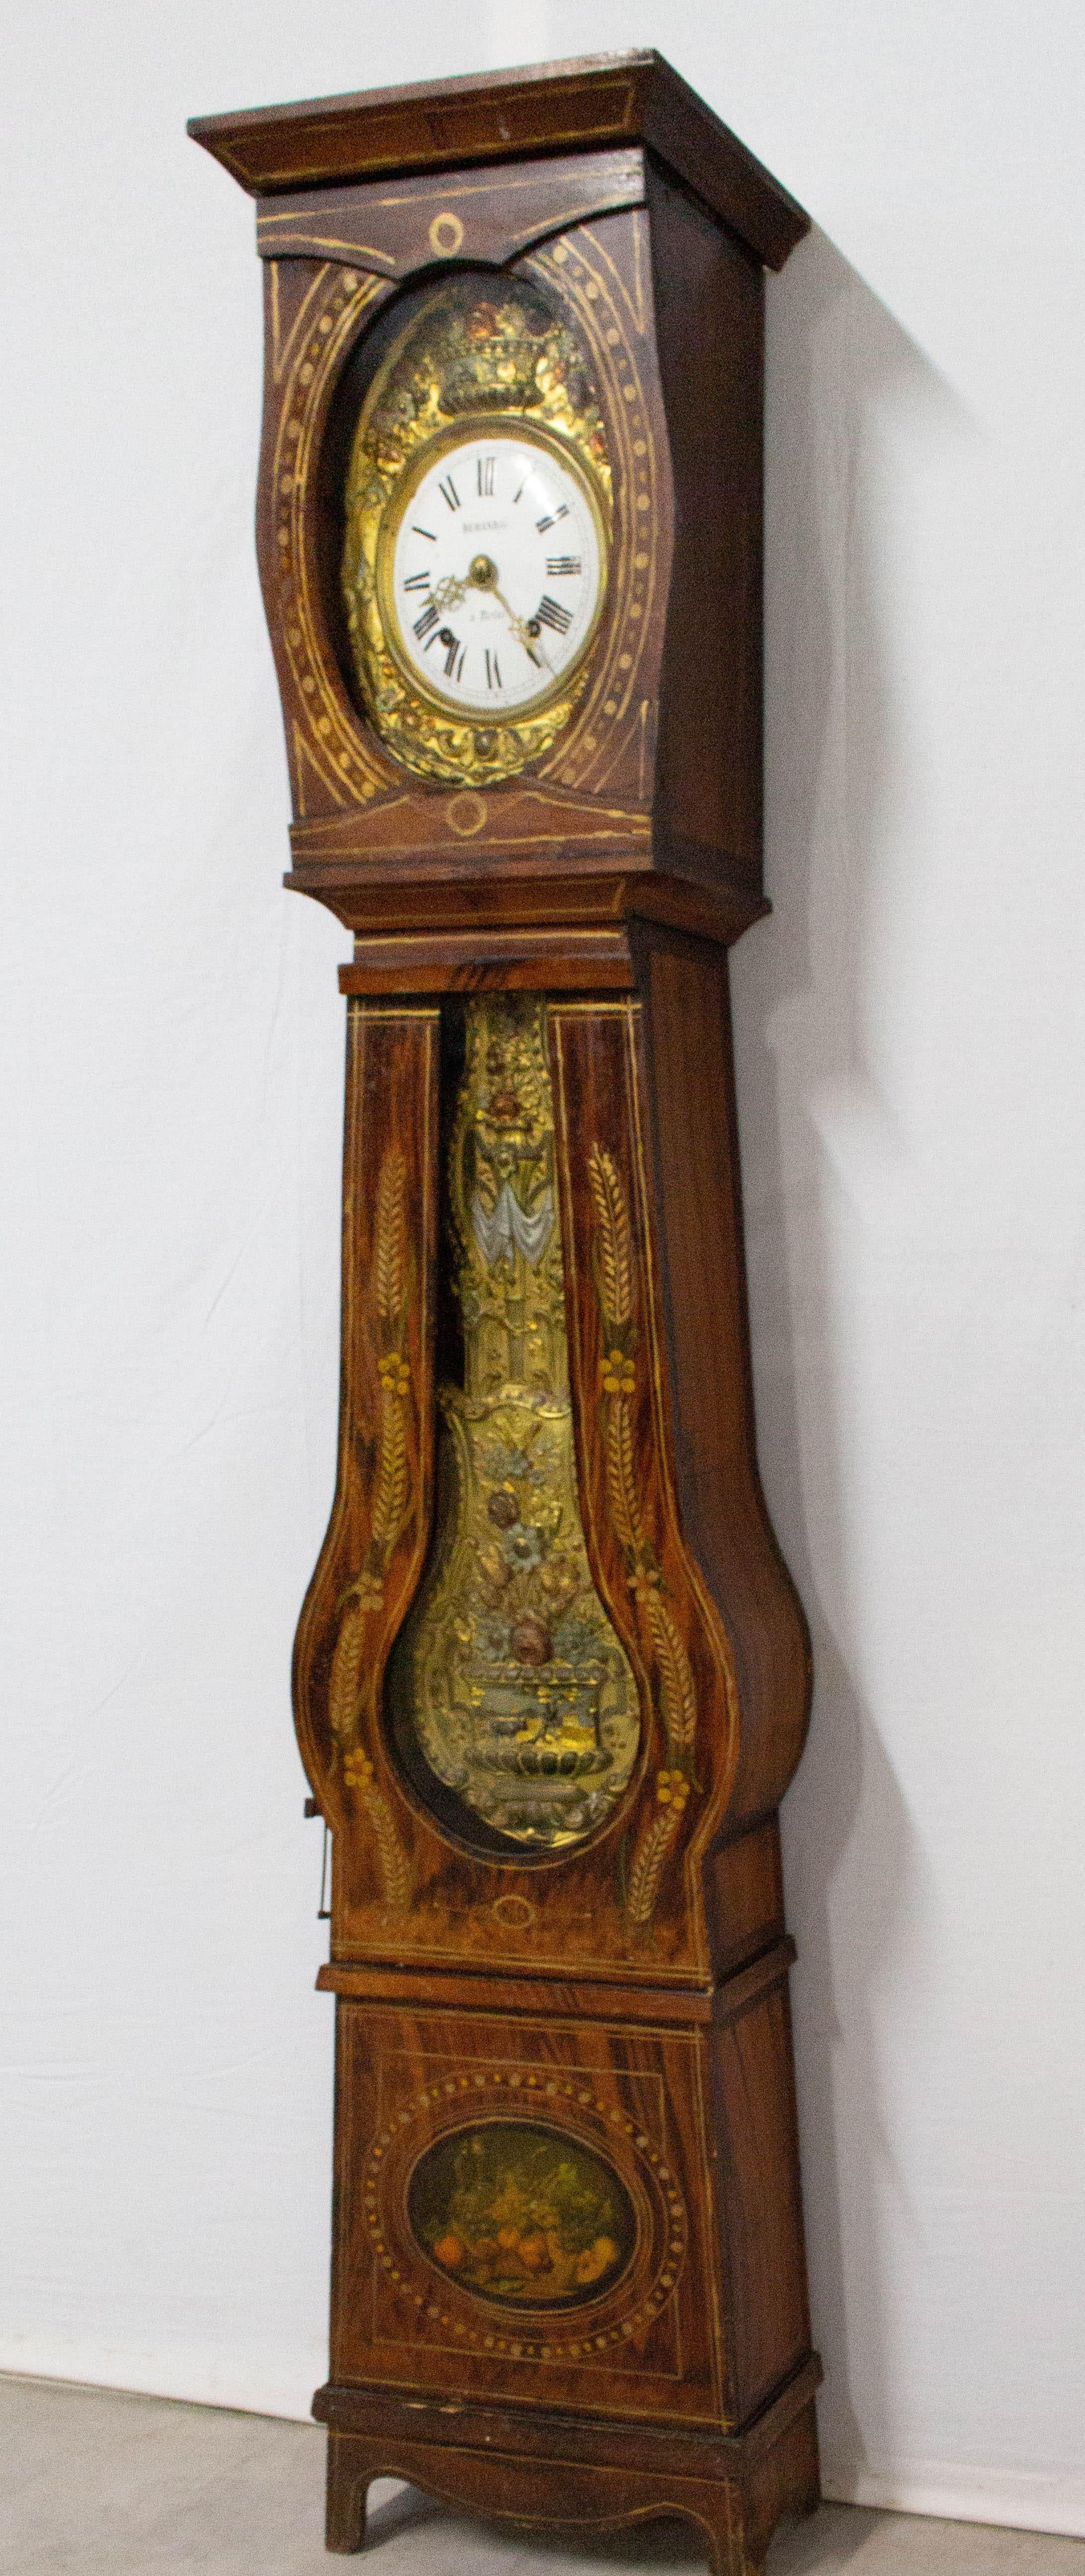 French Provincial 19th Century French Empire Comtoise or Grandfather Clock with Scenes of Farm